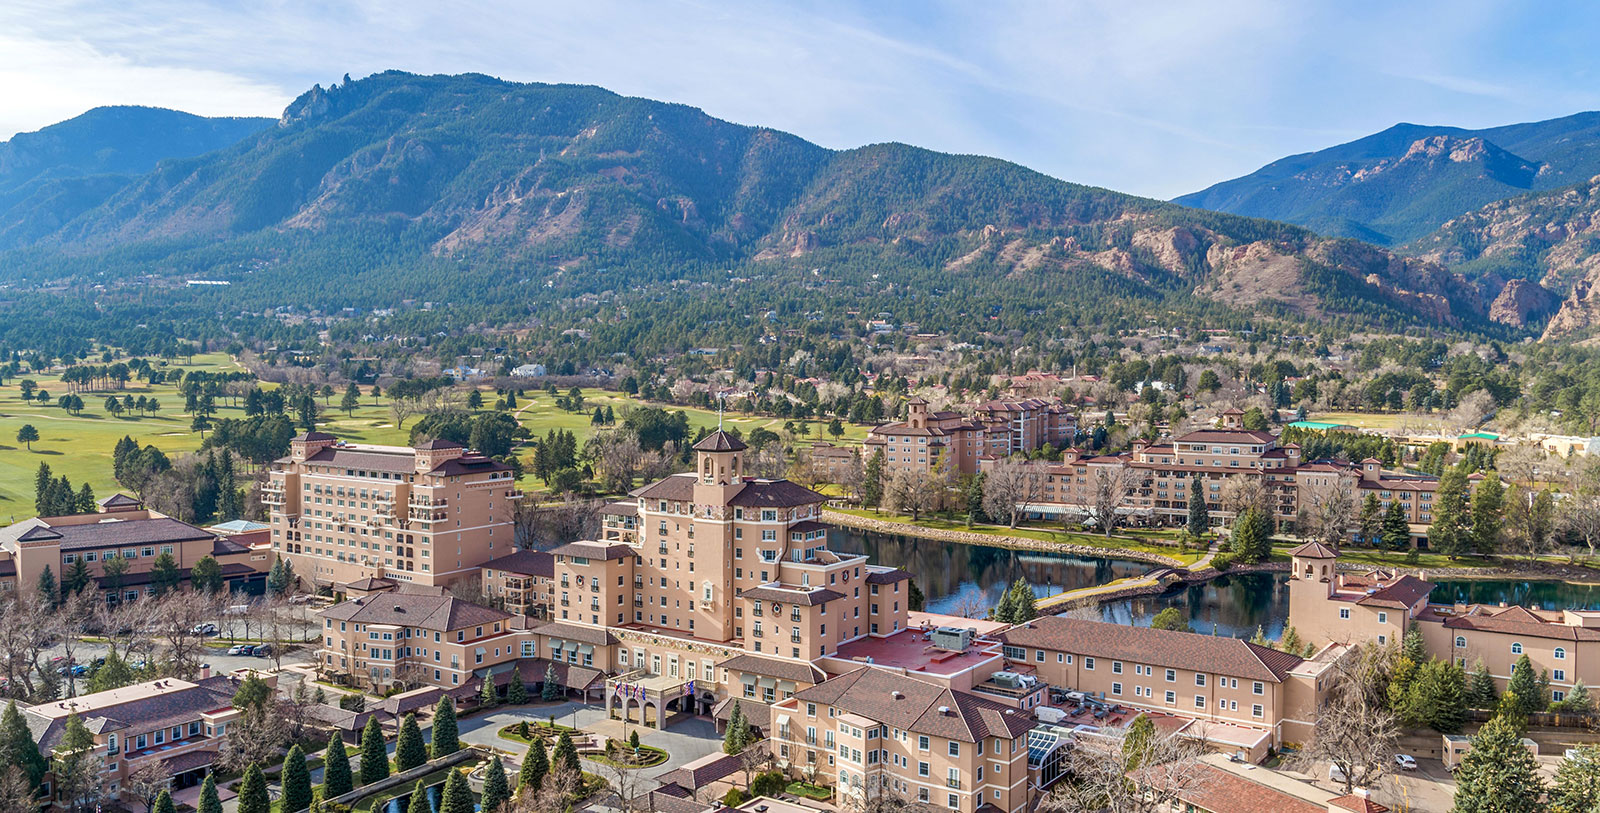 Discover The Broadmoor Seven Falls, The Broadmoor Manitou and Pikes Peak Cog Railway, Cheyenne Mountain Zoo, Pikes Peak and more.